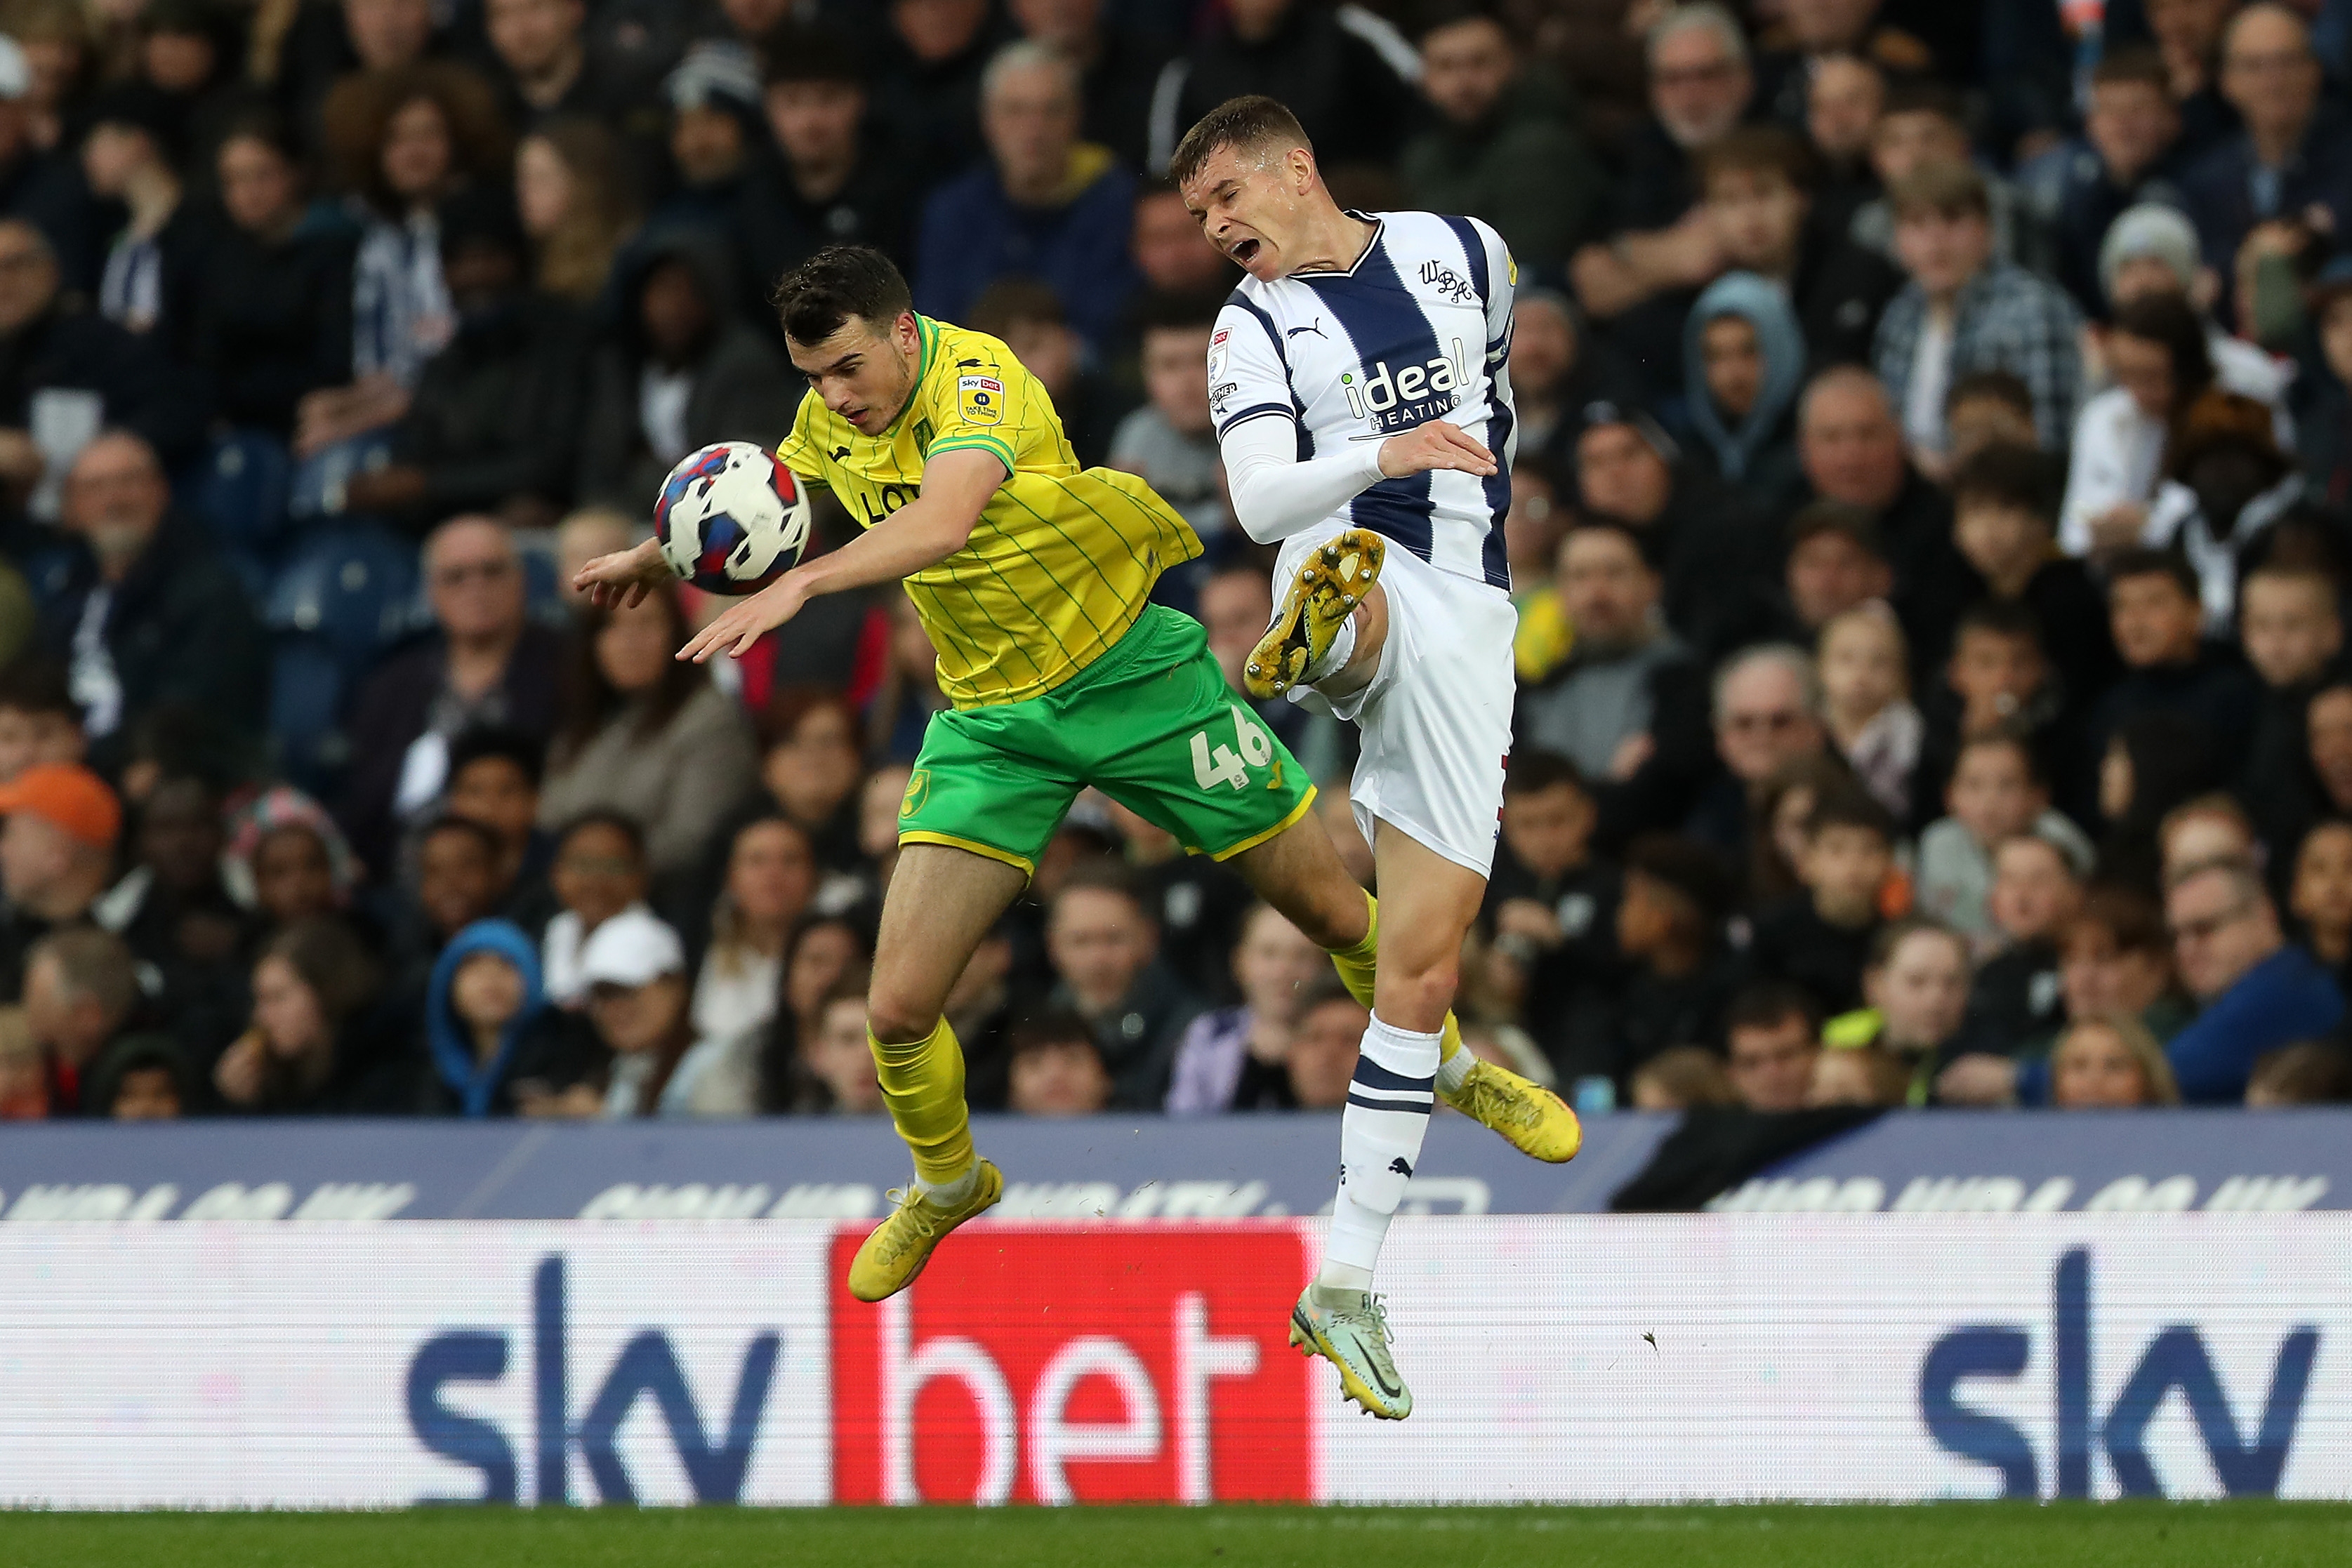 Norwich victory at The Hawthorns 3